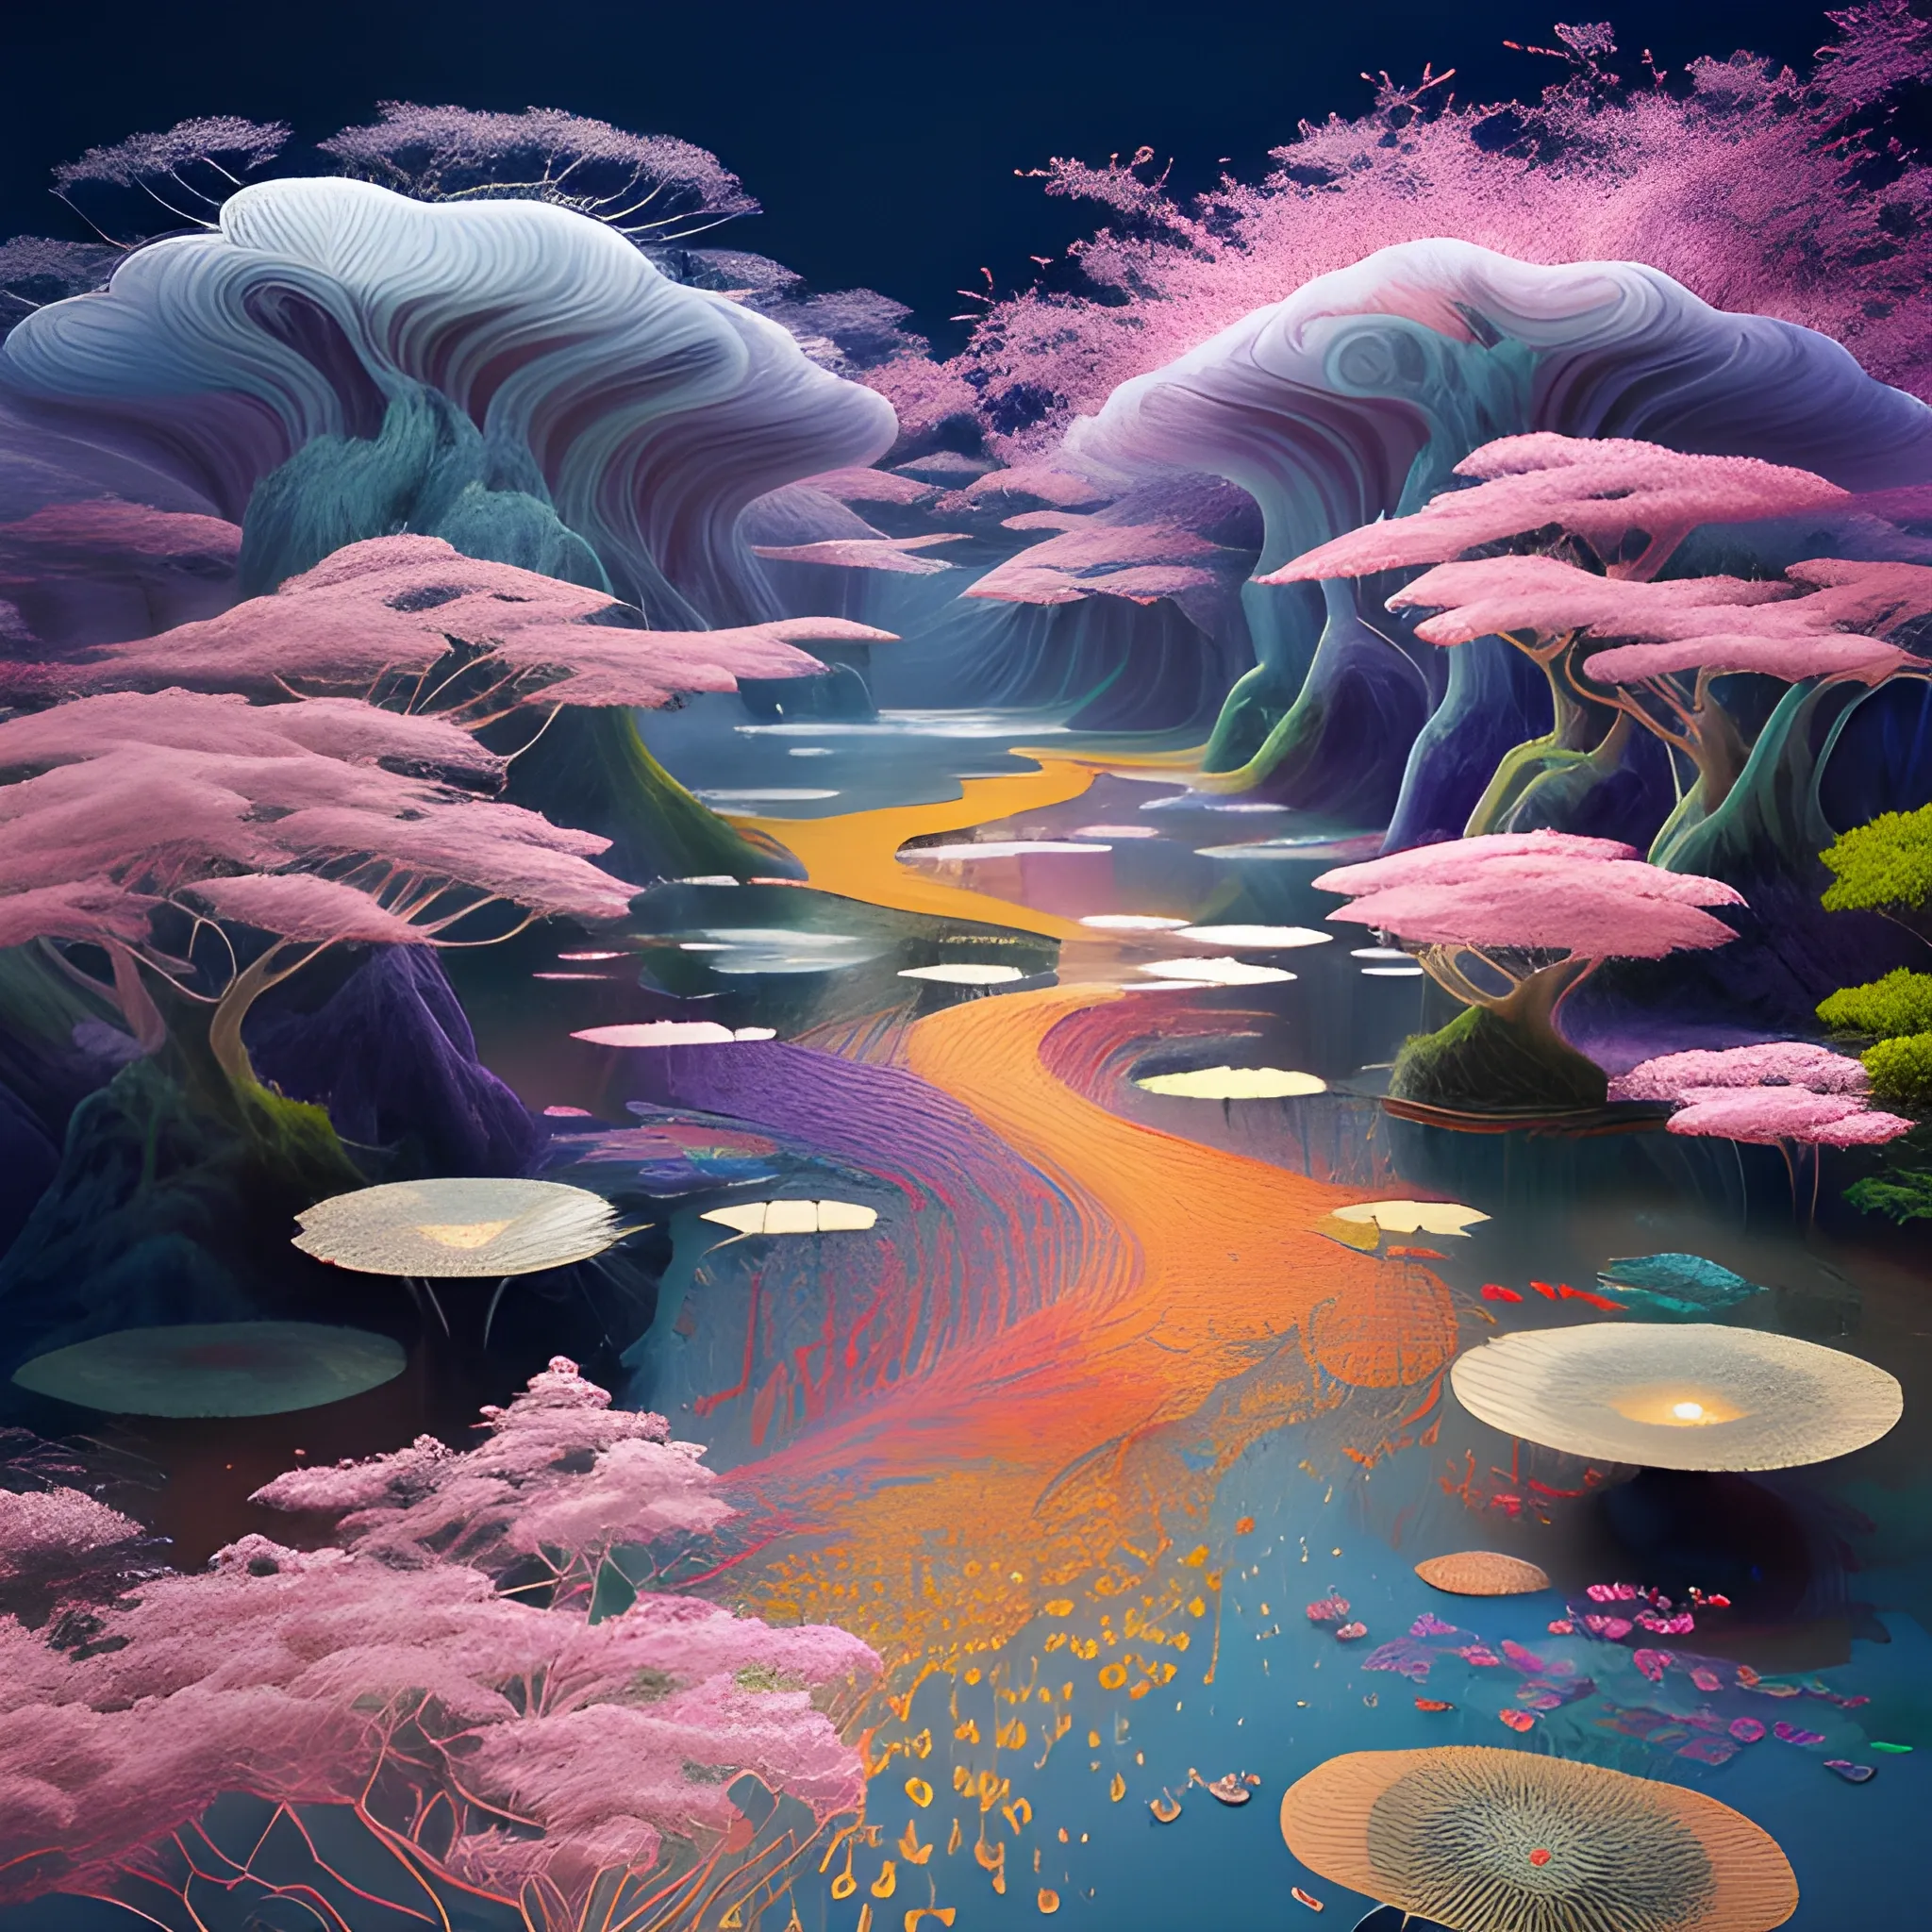 (by Ananta Mandal (and Andrew Biraj:0.5)), (in the style of nihonga), Style: Abstract, Medium: Digital illustration, Subject: An otherworldly landscape with floating islands, cascading waterfalls, and vibrant flora and fauna. Camera Angle: Overhead shot capturing the vastness and intricate details of the scene. The colors are saturated, and the lighting creates a warm and ethereal atmosphere. The painting is highly detailed, with every brushstroke capturing the complexity of the imaginary world., (high quality), (detailed), (masterpiece), (best quality), (highres), (extremely detailed), (8k), seed:1015689